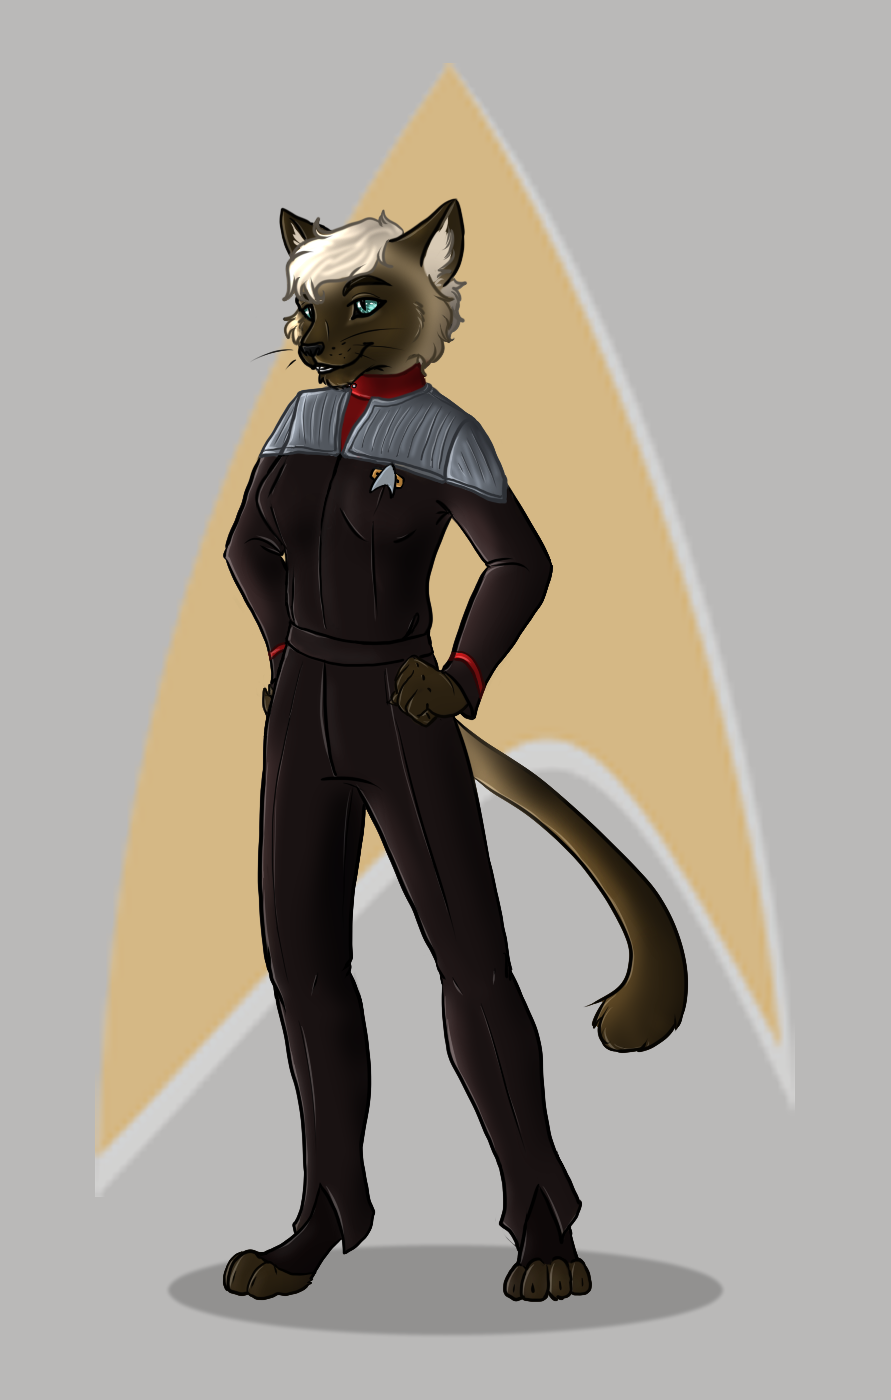 Ithorian Professor of Xenoecology Chash Rits by unusualsuspex on DeviantArt